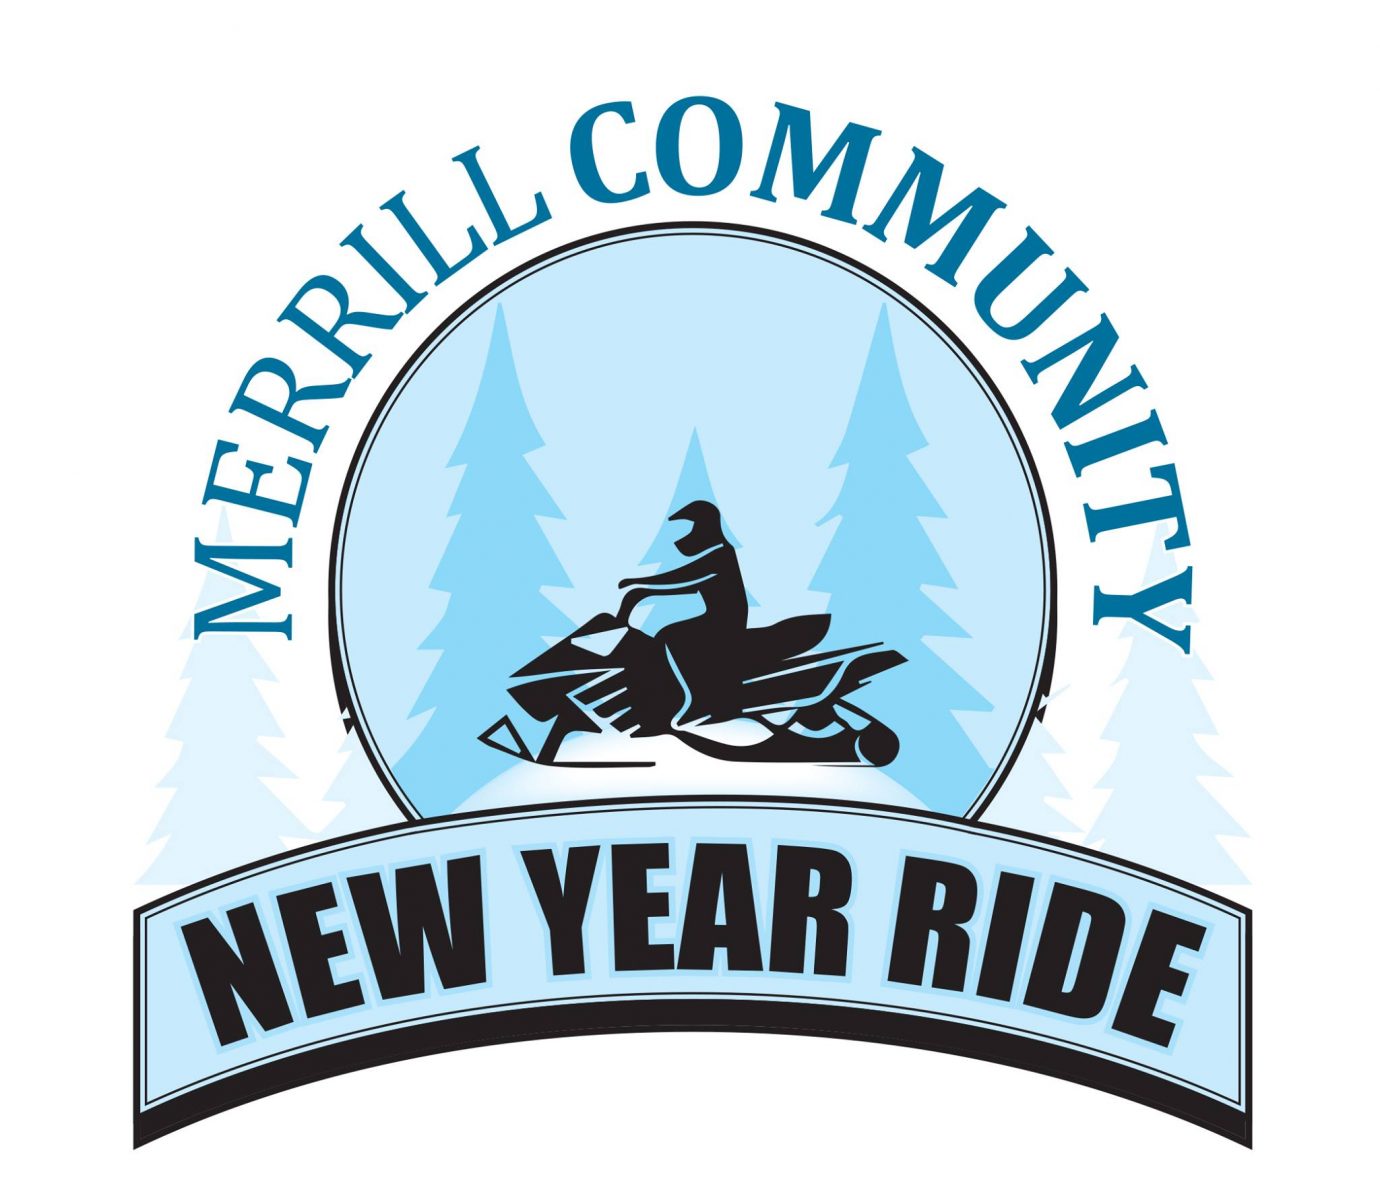 New Year Ride raises nearly $2k in support of local veterans